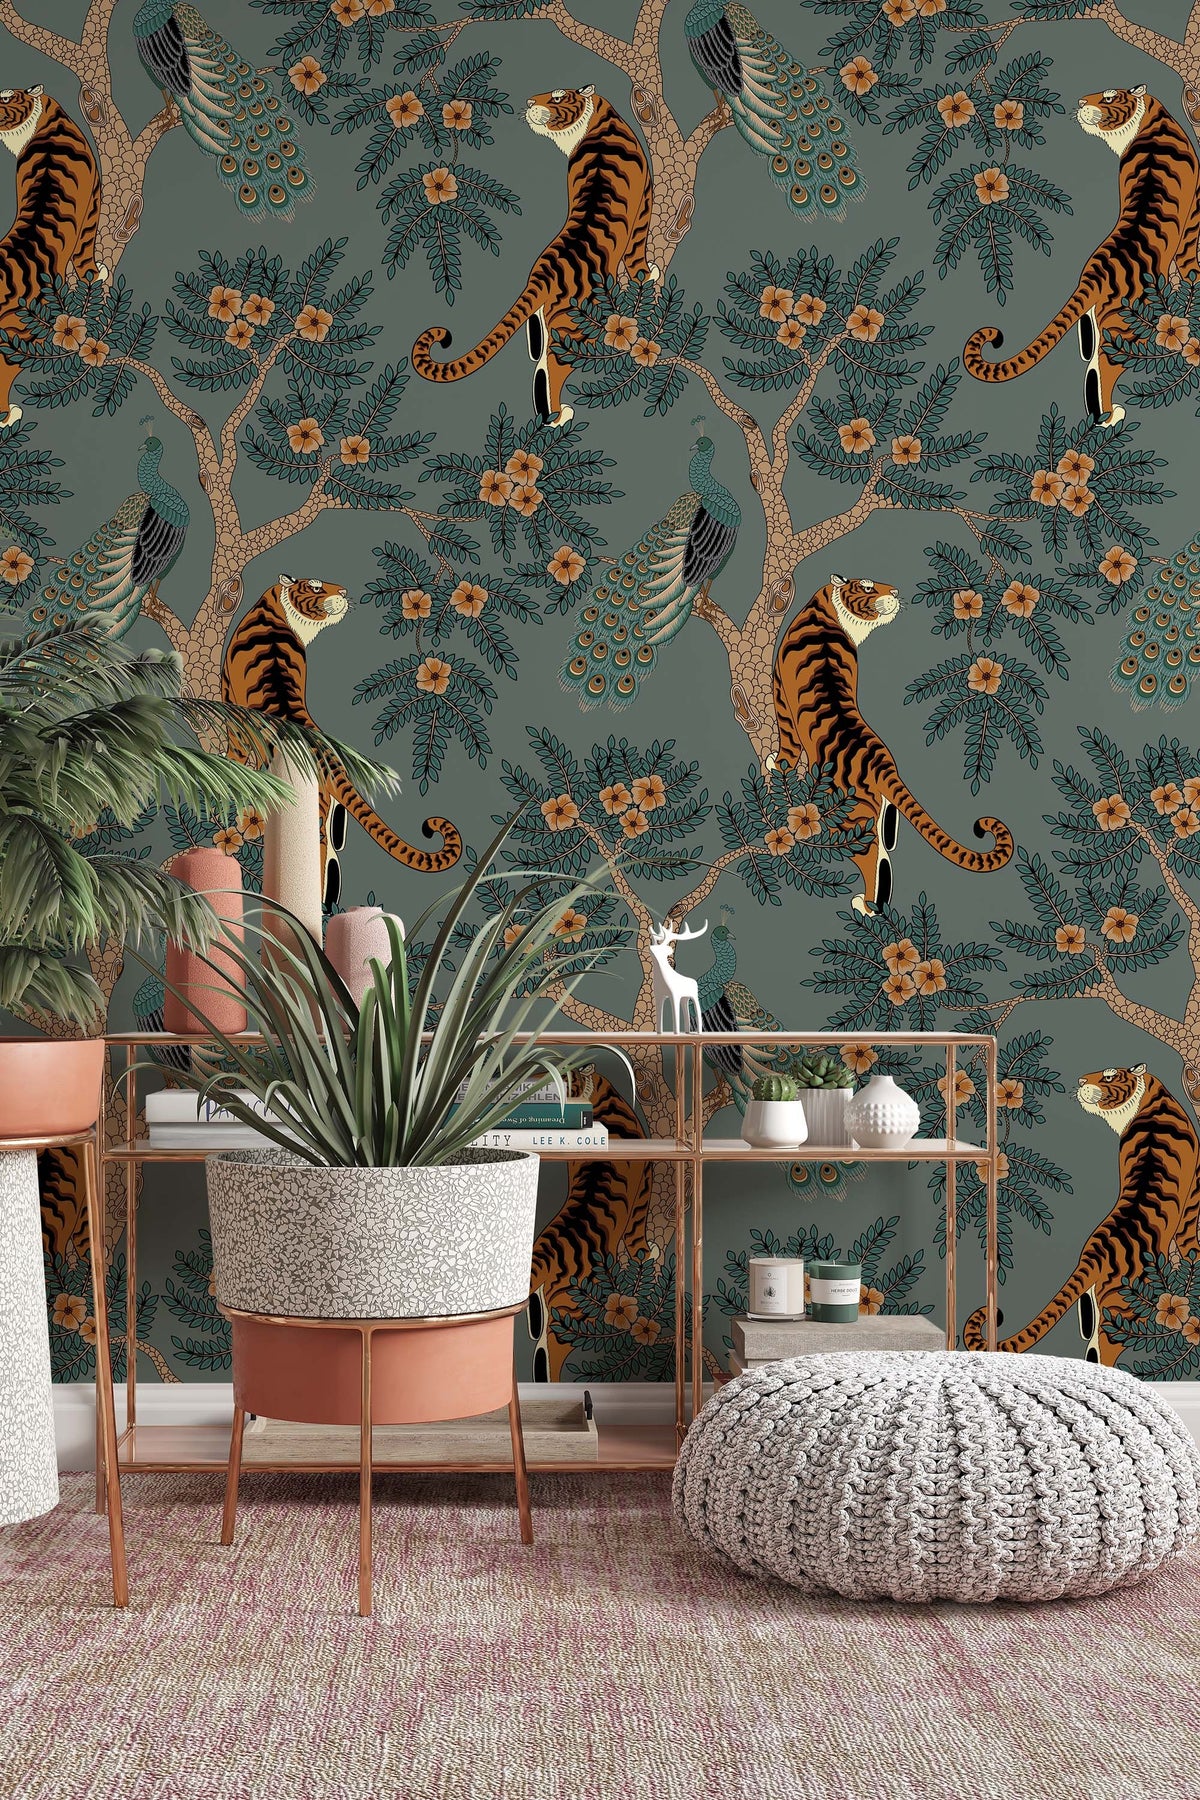 Buy Peacock Feather 1265 Wallpaper Mural Self Adhesive Peel and Online in  India  Etsy